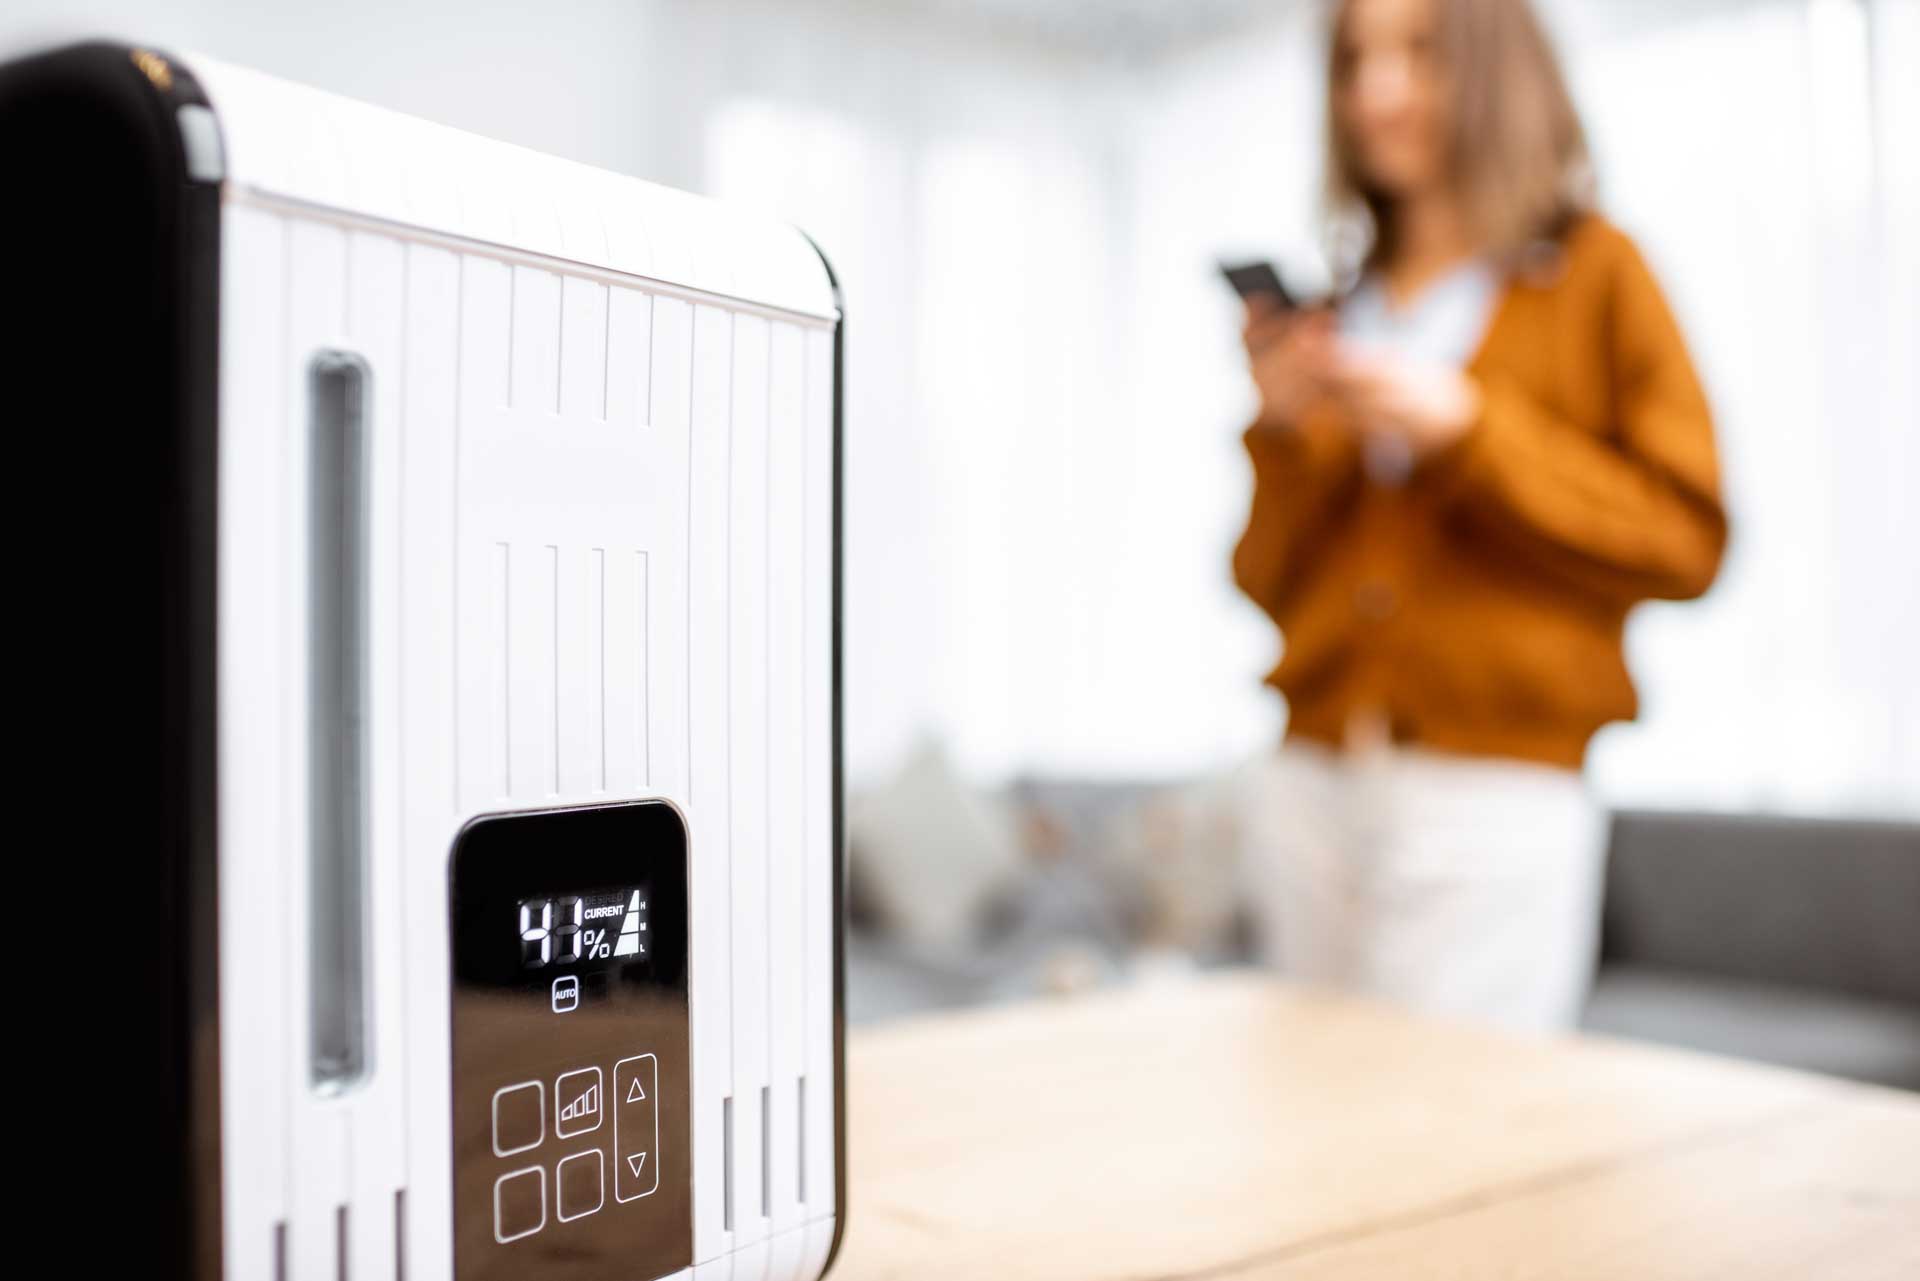 A modern white toaster with a digital display on a kitchen counter, with a blurred woman holding a phone near a water filtration system in the background.